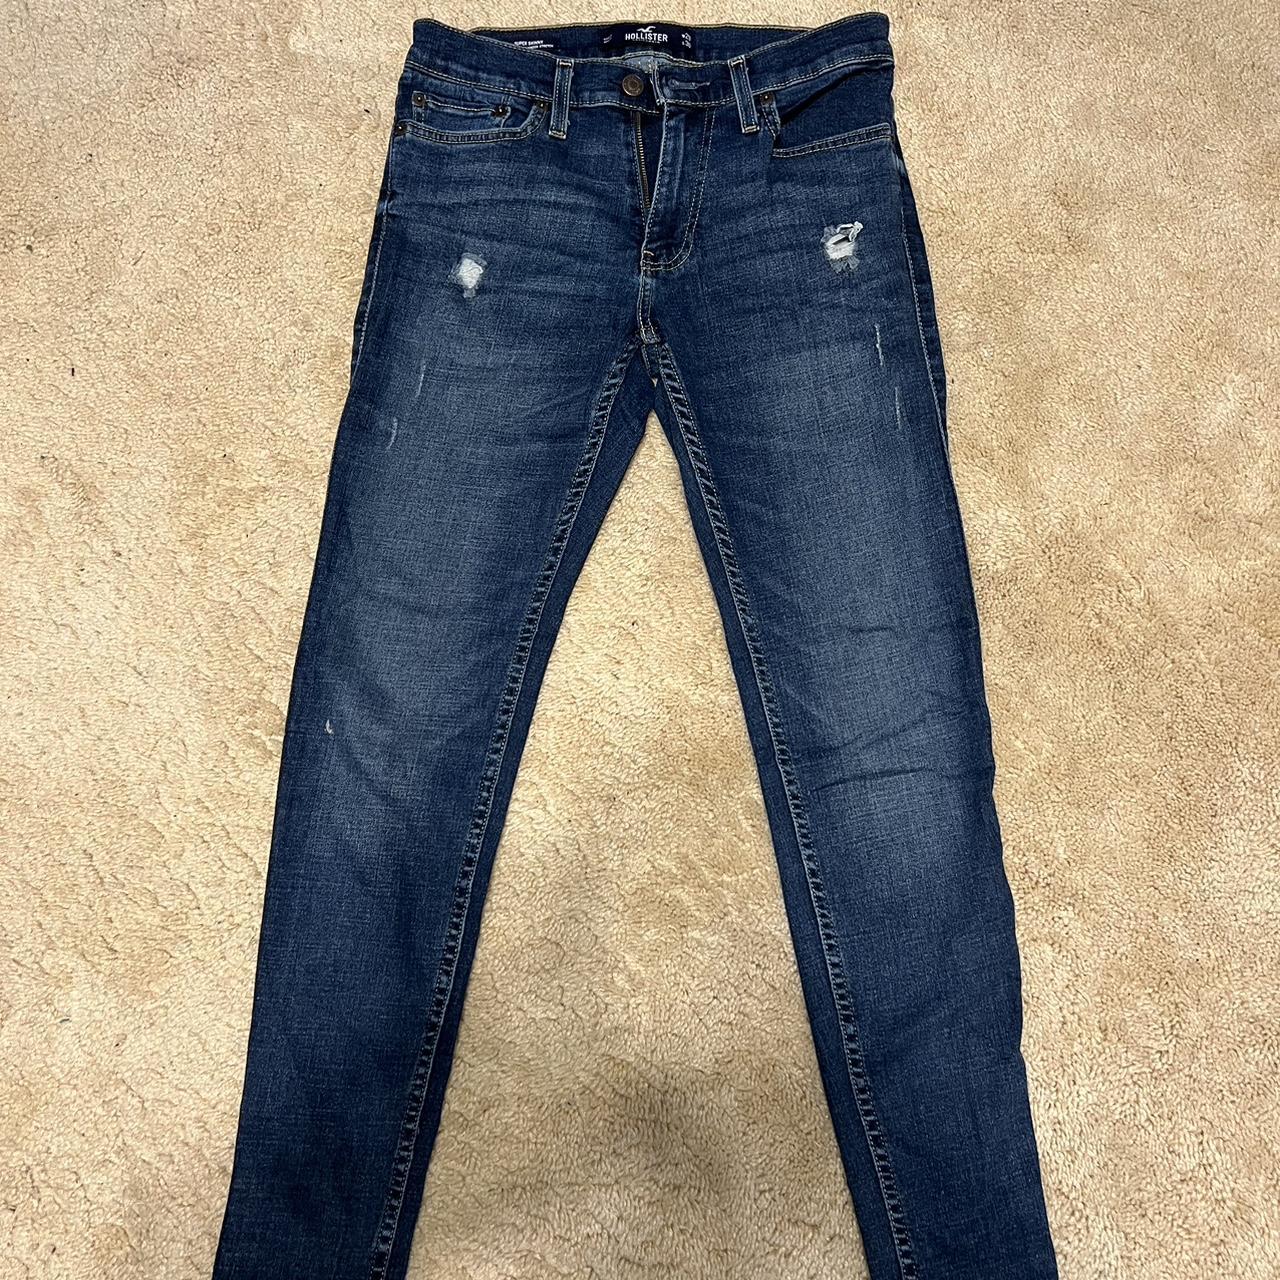 Hollister The Hollister Skinny Button Fly Jeans Men's Size 29X30